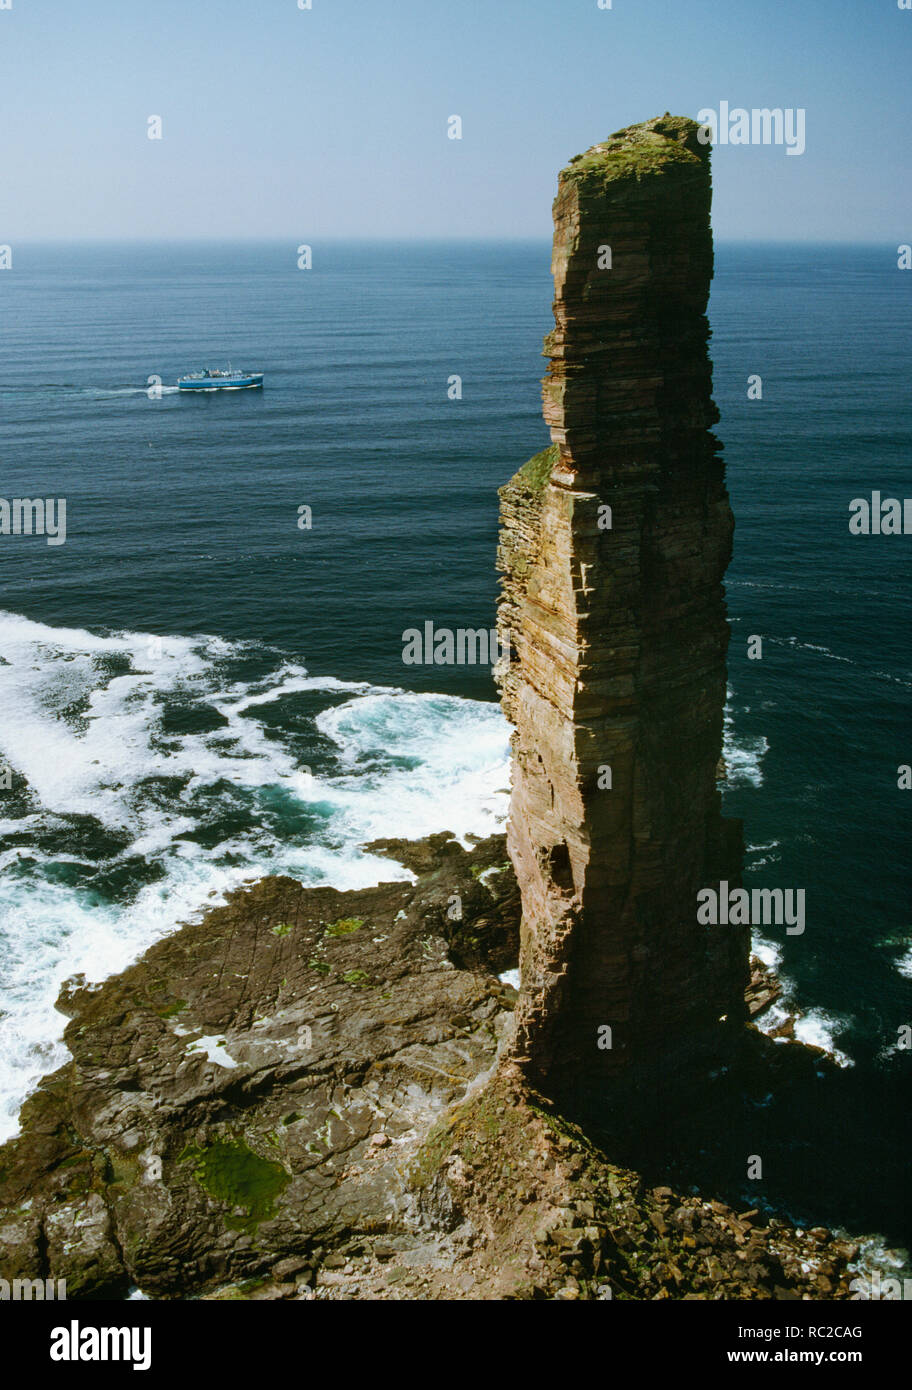 Old Man of Hoy rock stack from the cliffs of Hoy, Orkney, Scotland. The third of many St Ola (III) Stromness to Scrabster ferrys in background. 1987 Stock Photo